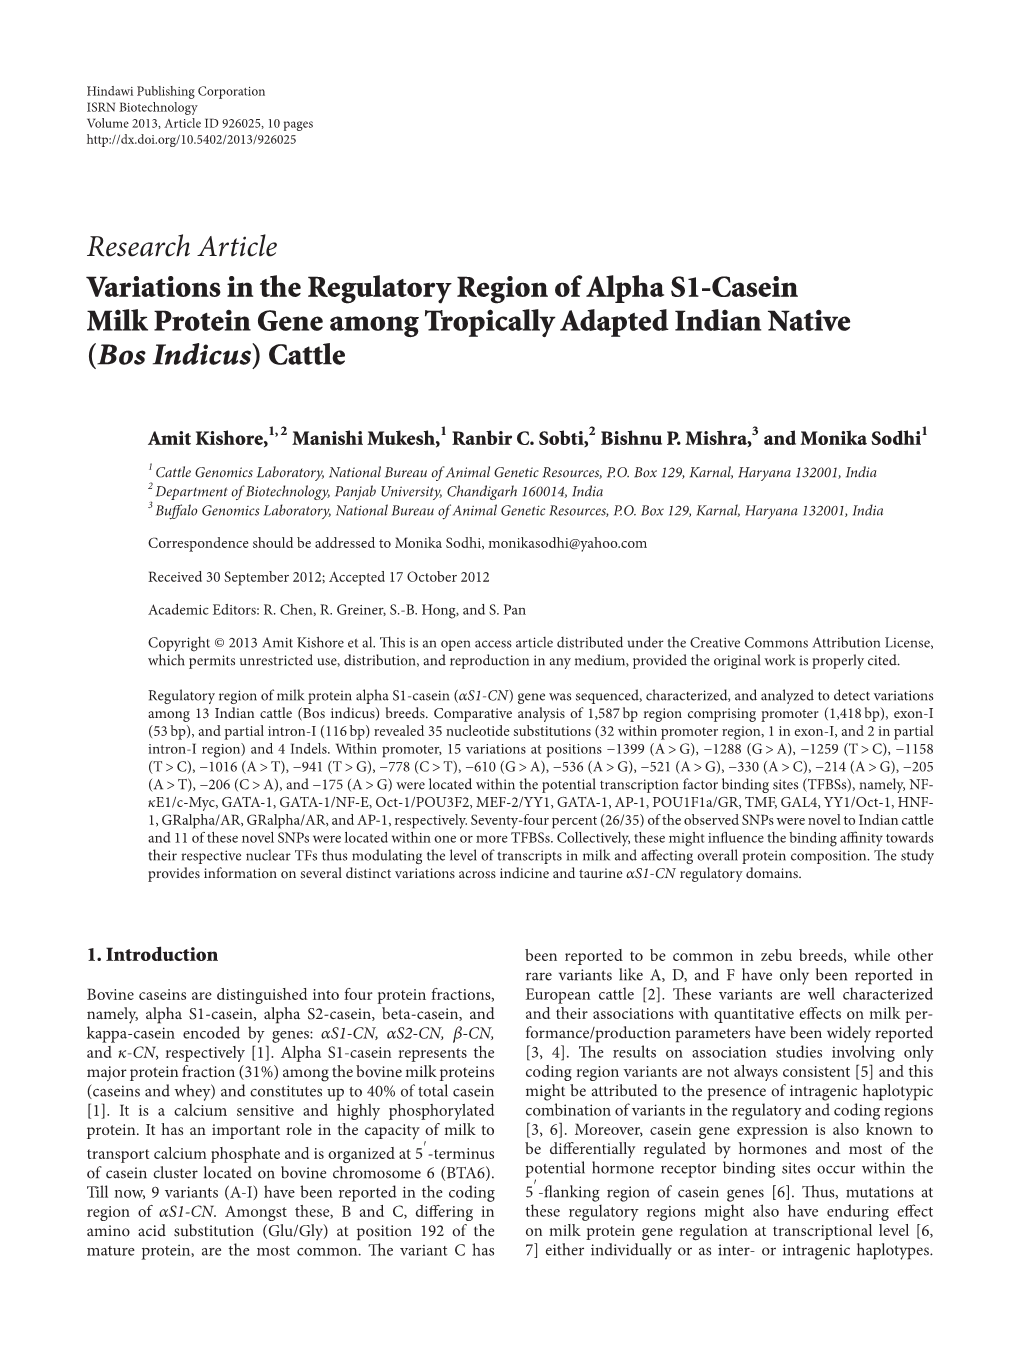 Research Article Variations in the Regulatory Region of Alpha S1-Casein Milk Protein Gene Among Tropically Adapted Indian Native (Bos Indicus) Cattle